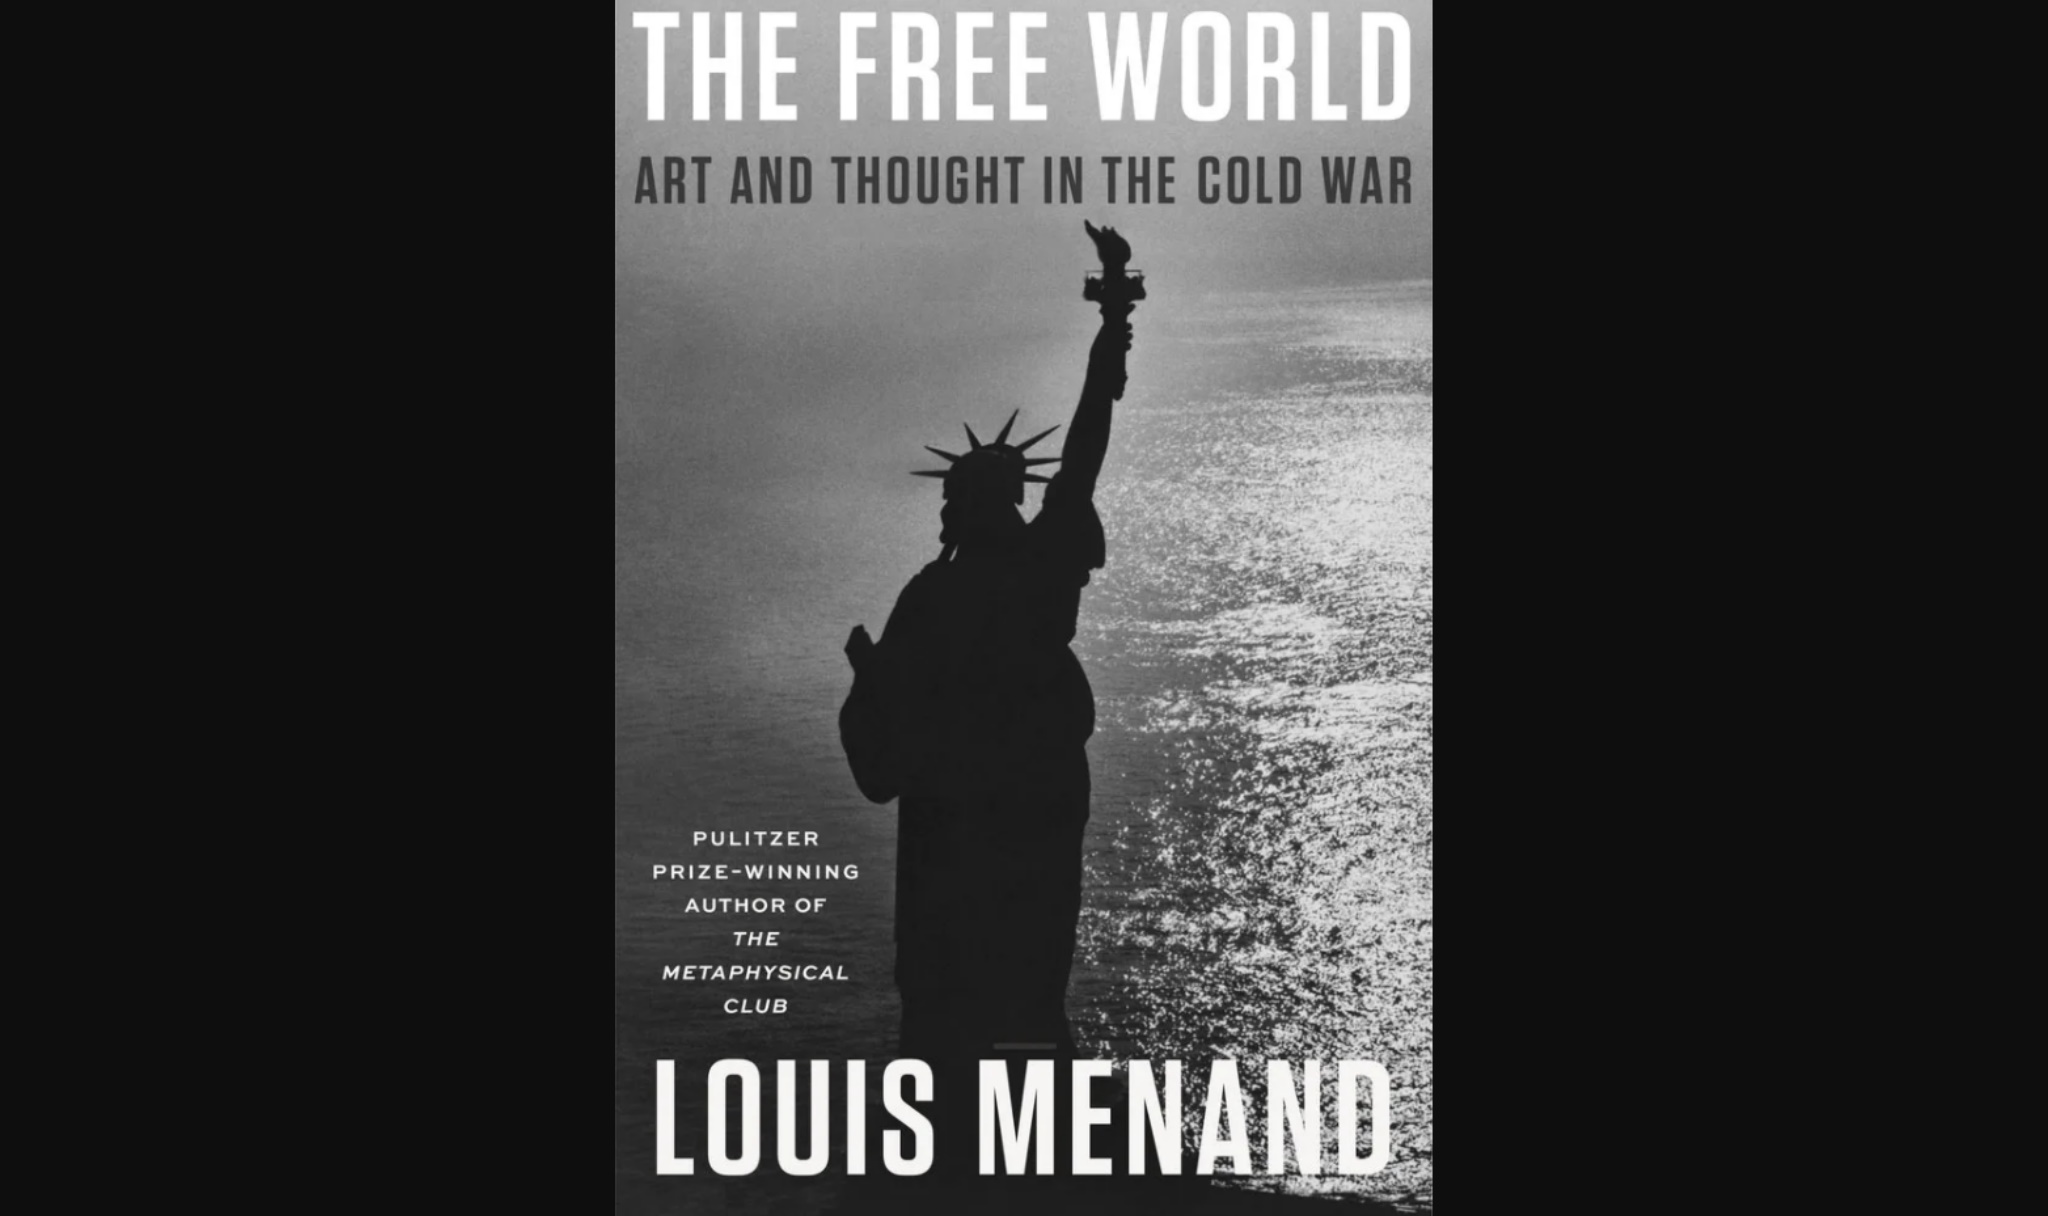 The Free World by Louis Menand